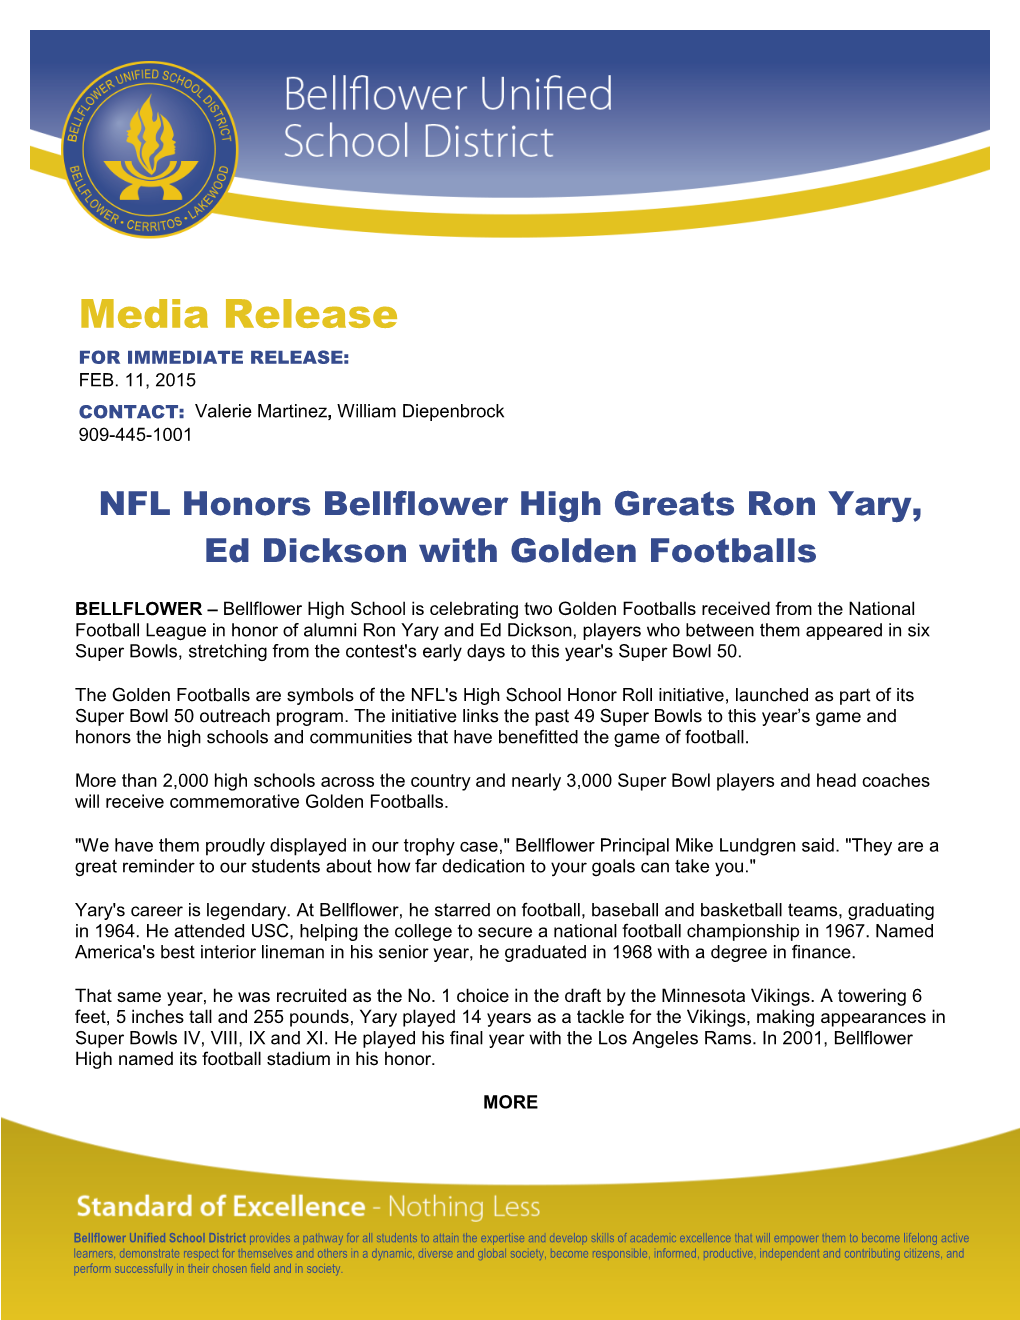 NFL Honors Bellflower High Greats Ron Yary, Ed Dickson with Golden Footballs